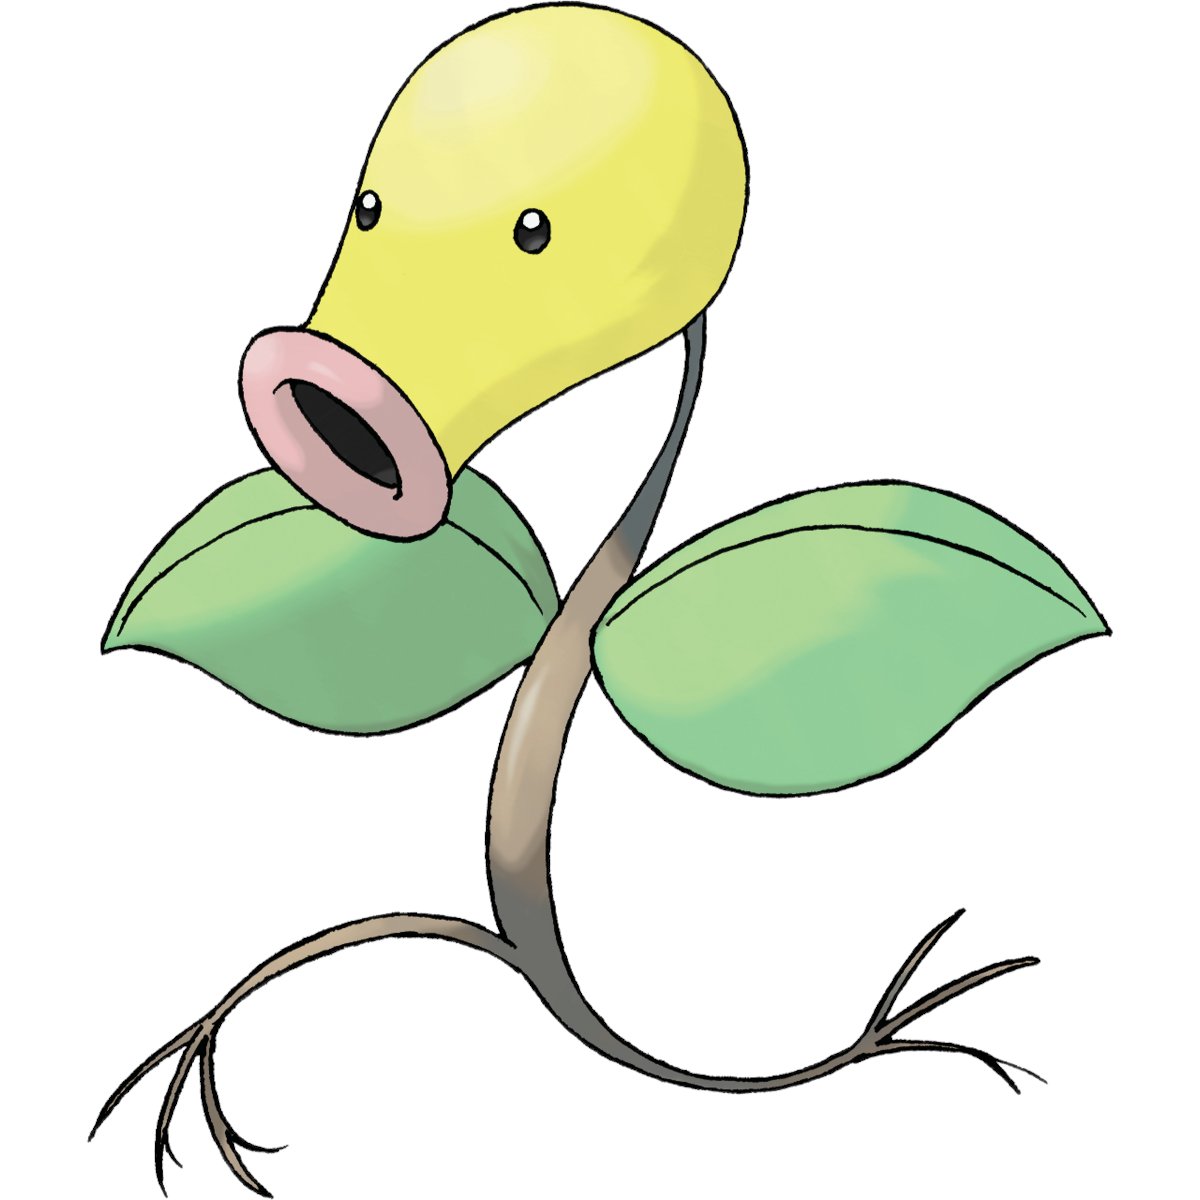 2. RENE MAGRITTEWhile he may claim ce n'est pas un Bellsprout, we all know better